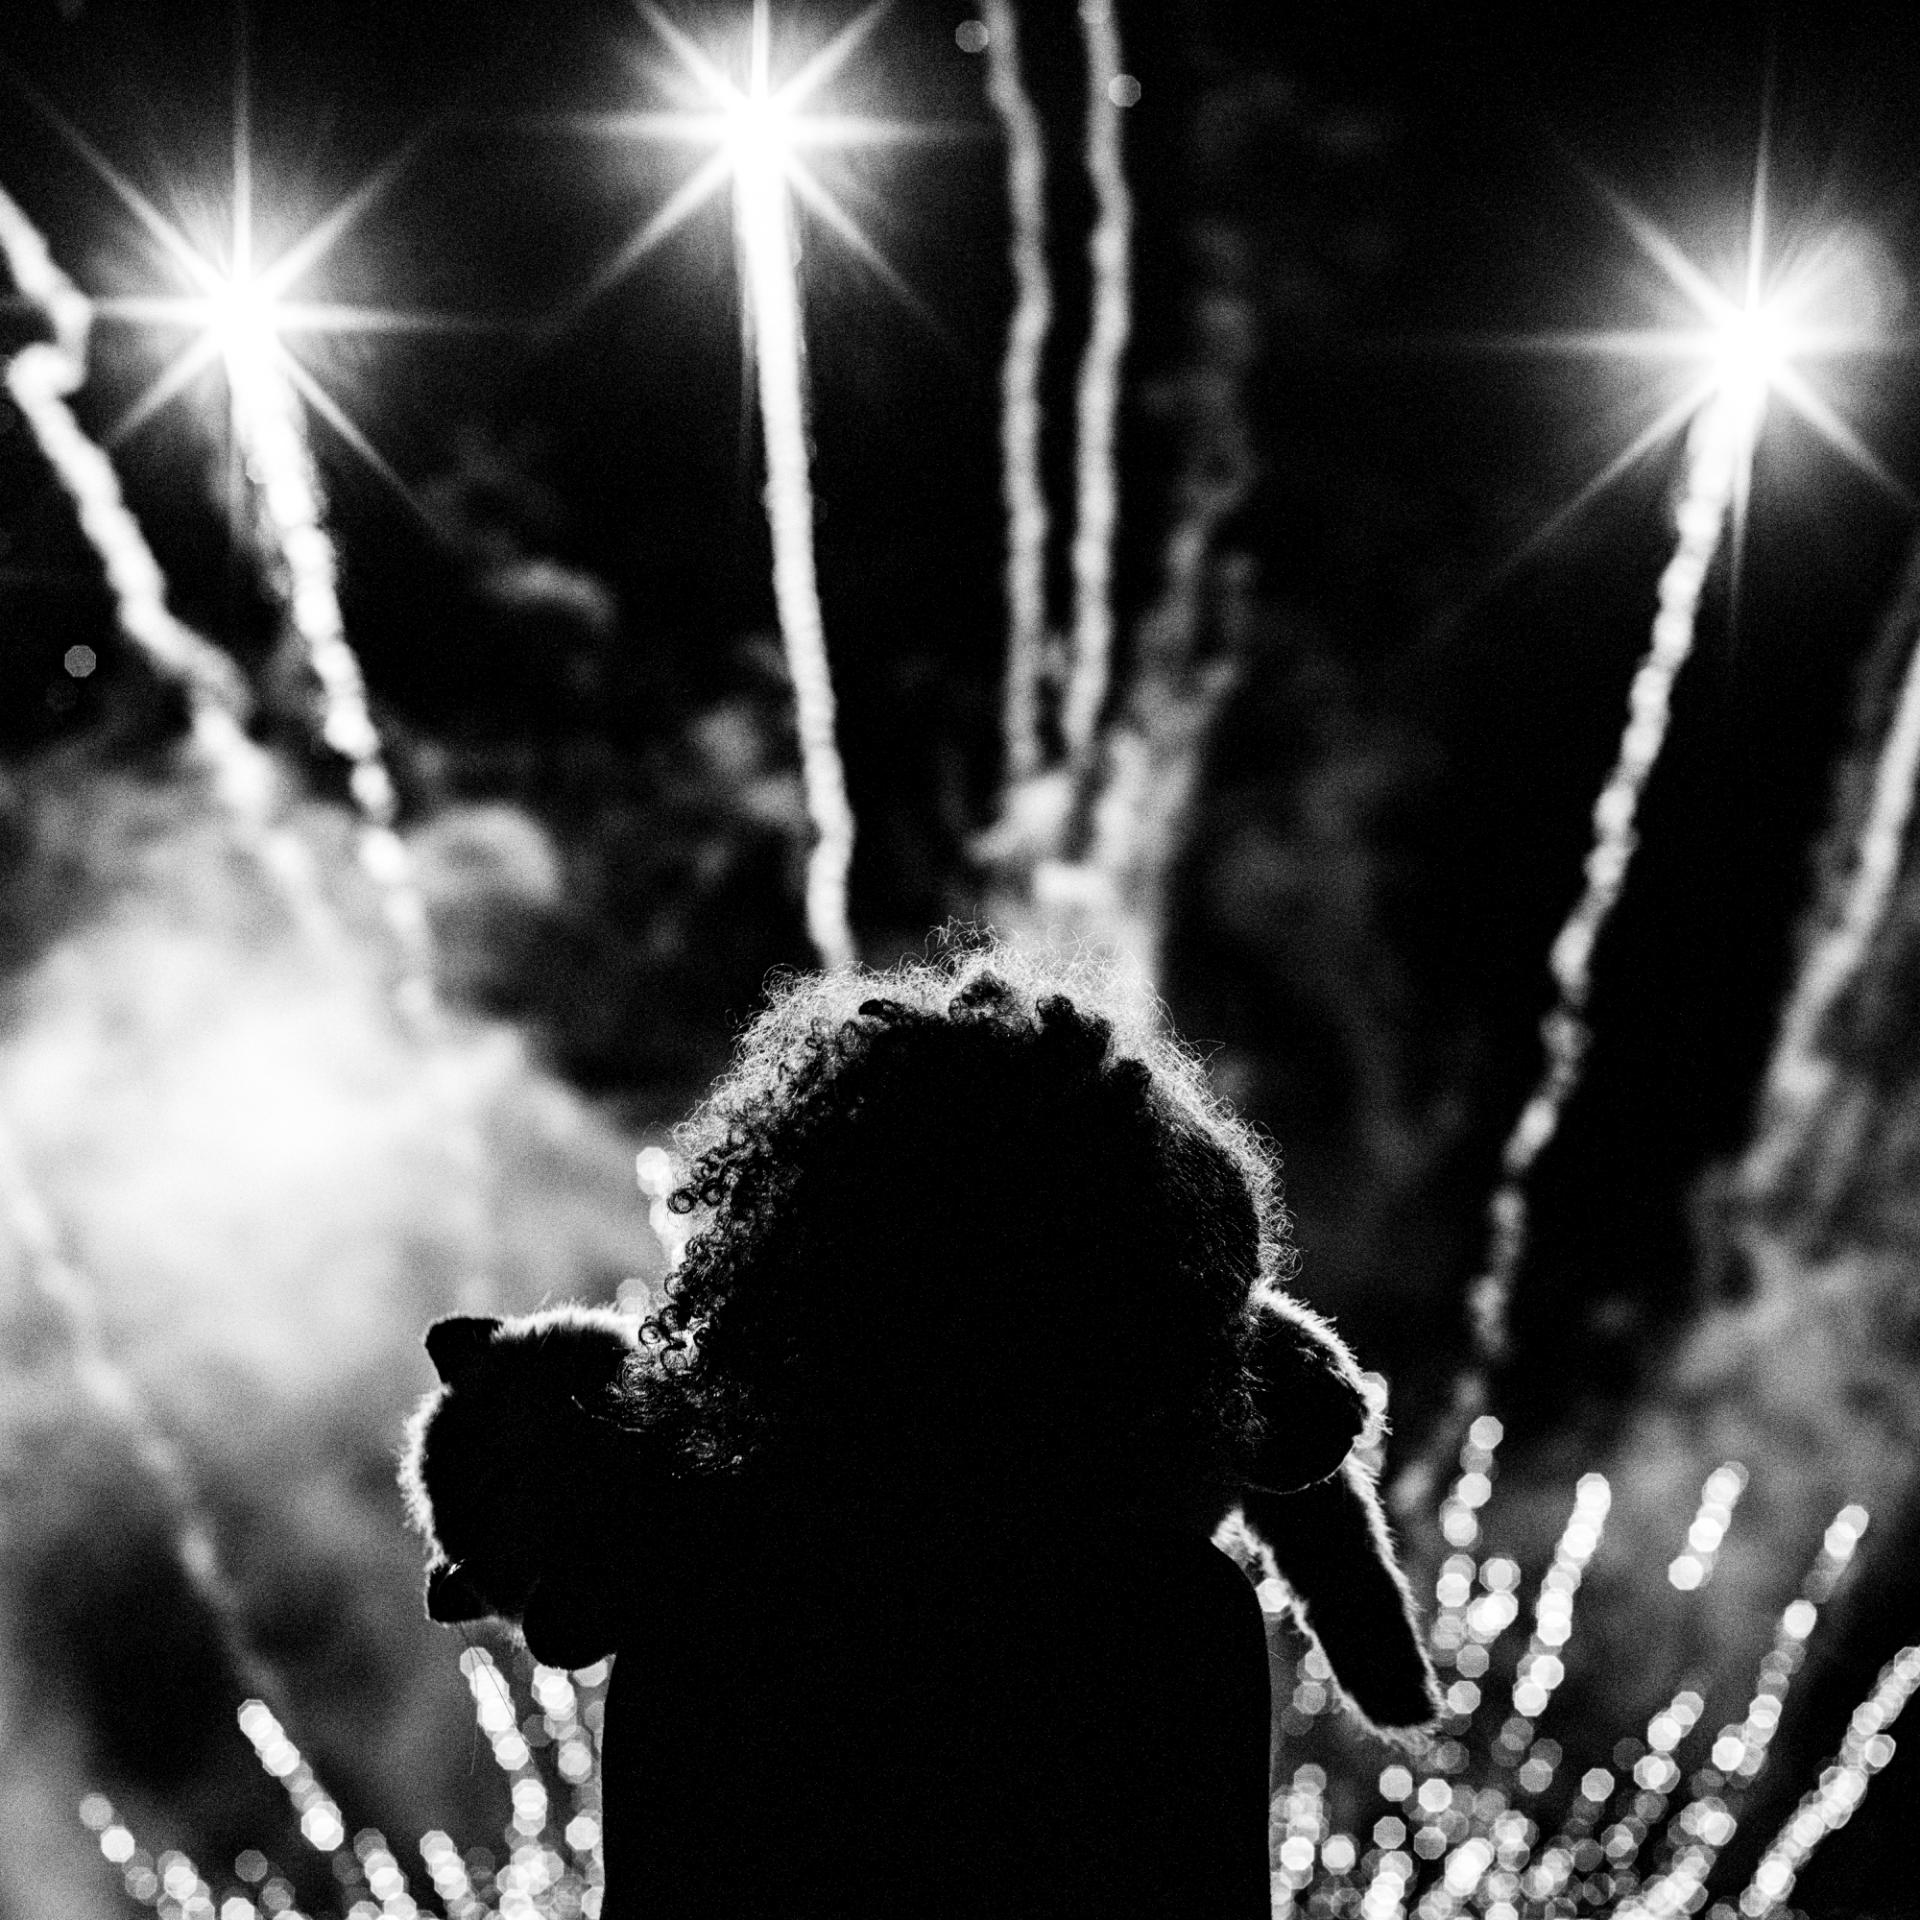 New York Photography Awards Winner - Me and my plush cat watching the fireworks